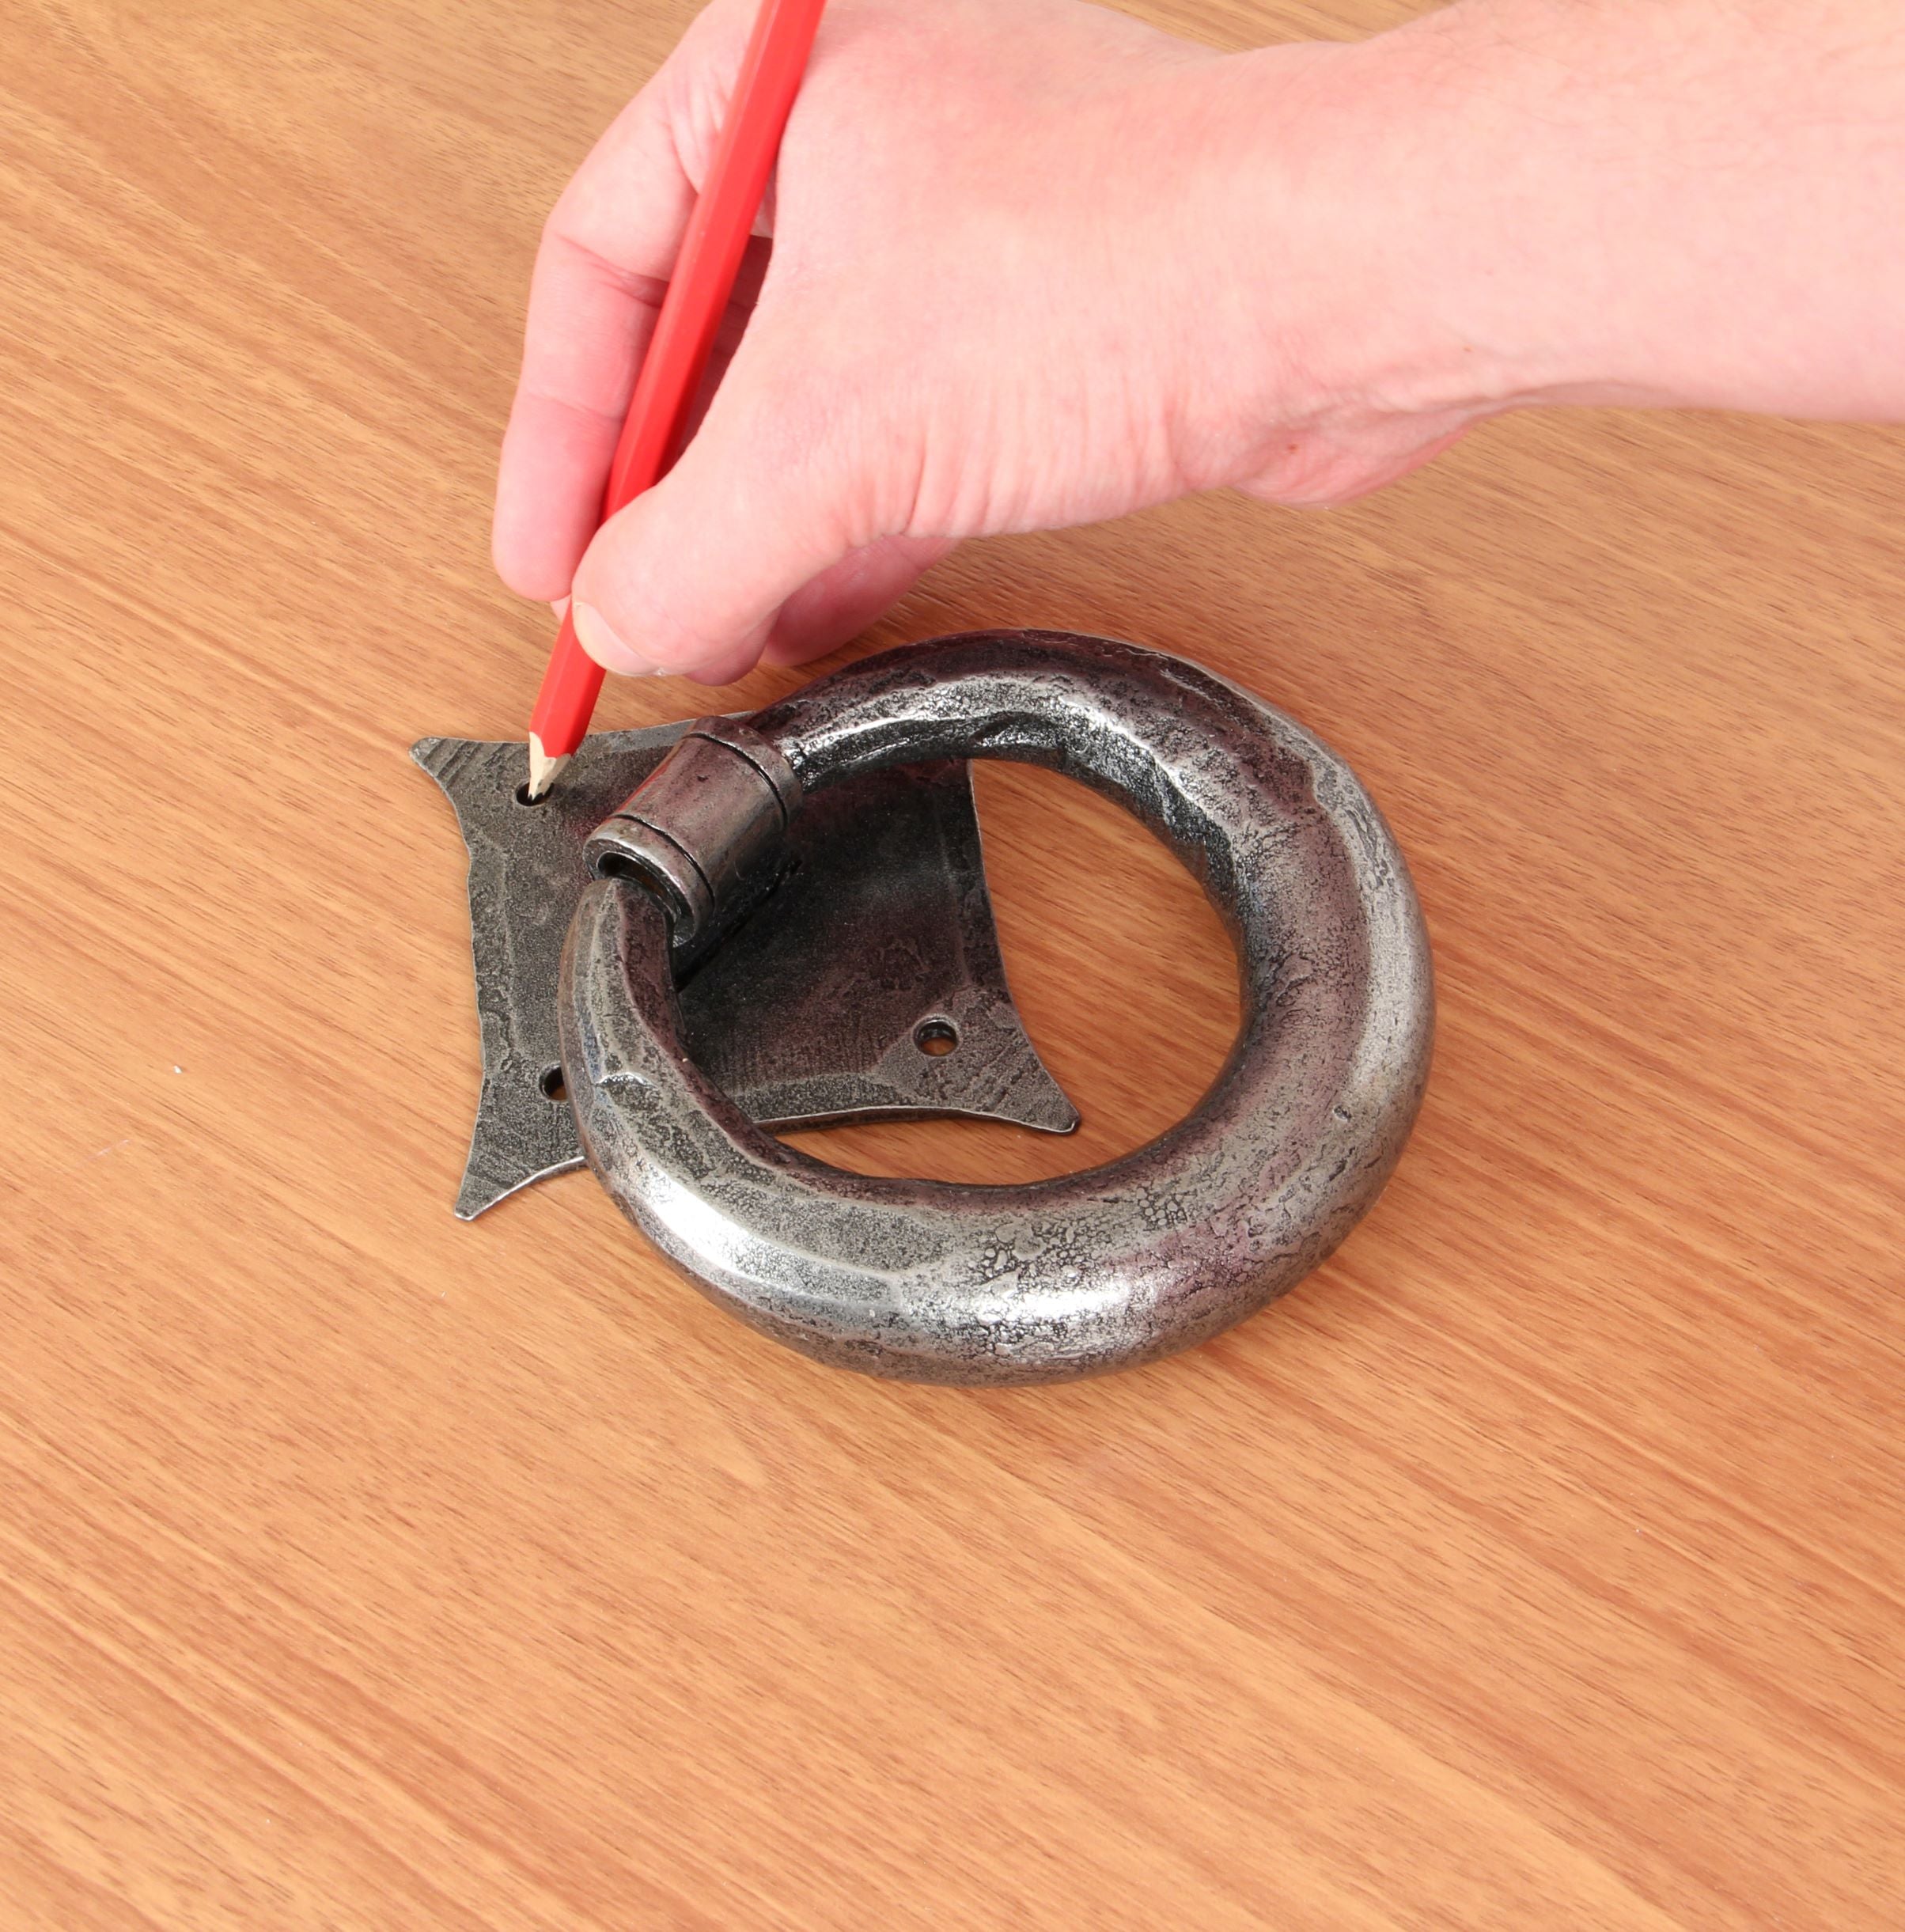 Person marking the screw hole of a Pewter door knocker on a wooden door using a pencil.